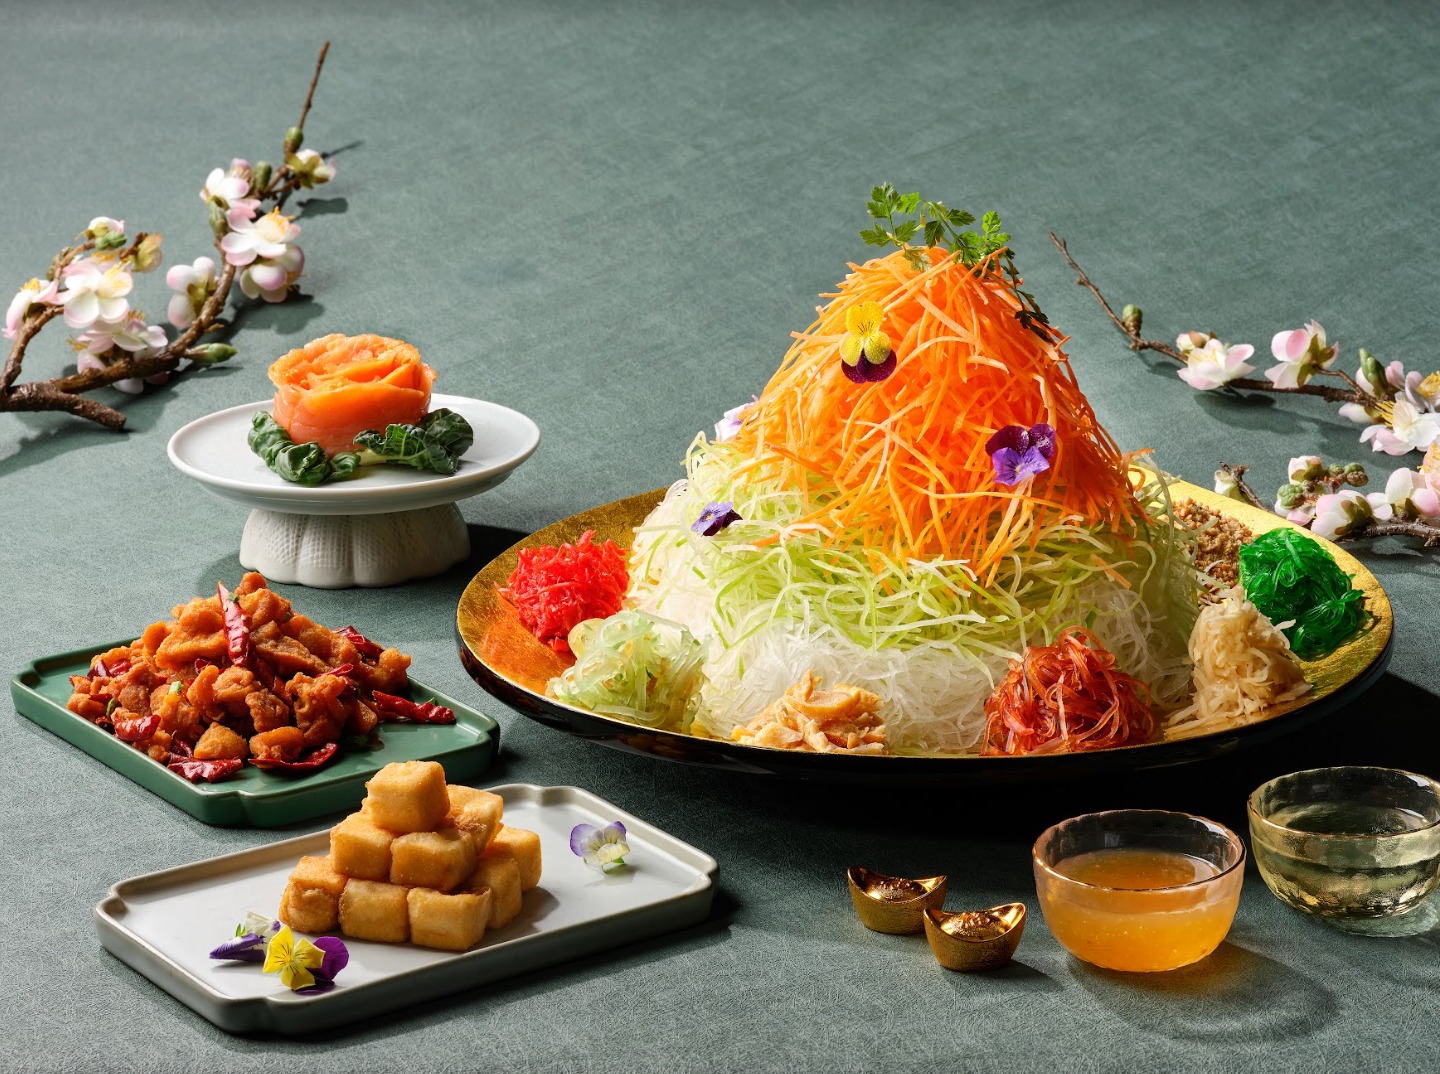 Lobang: MORE THAN 50 CNY 2023 F&B Deals - Your one stop guide to Yusheng, Pen Cai, Set Menus and more this Lunar New Year! - 71